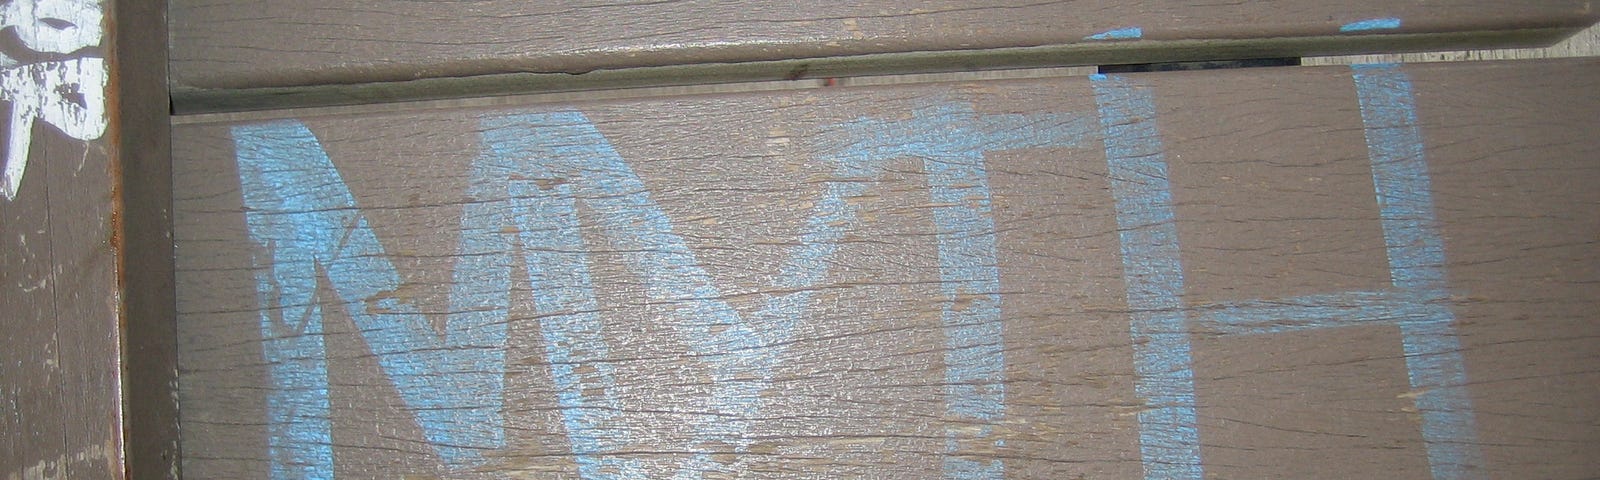 “Myth” written on the ground in blue color with white colored shoes besides it.